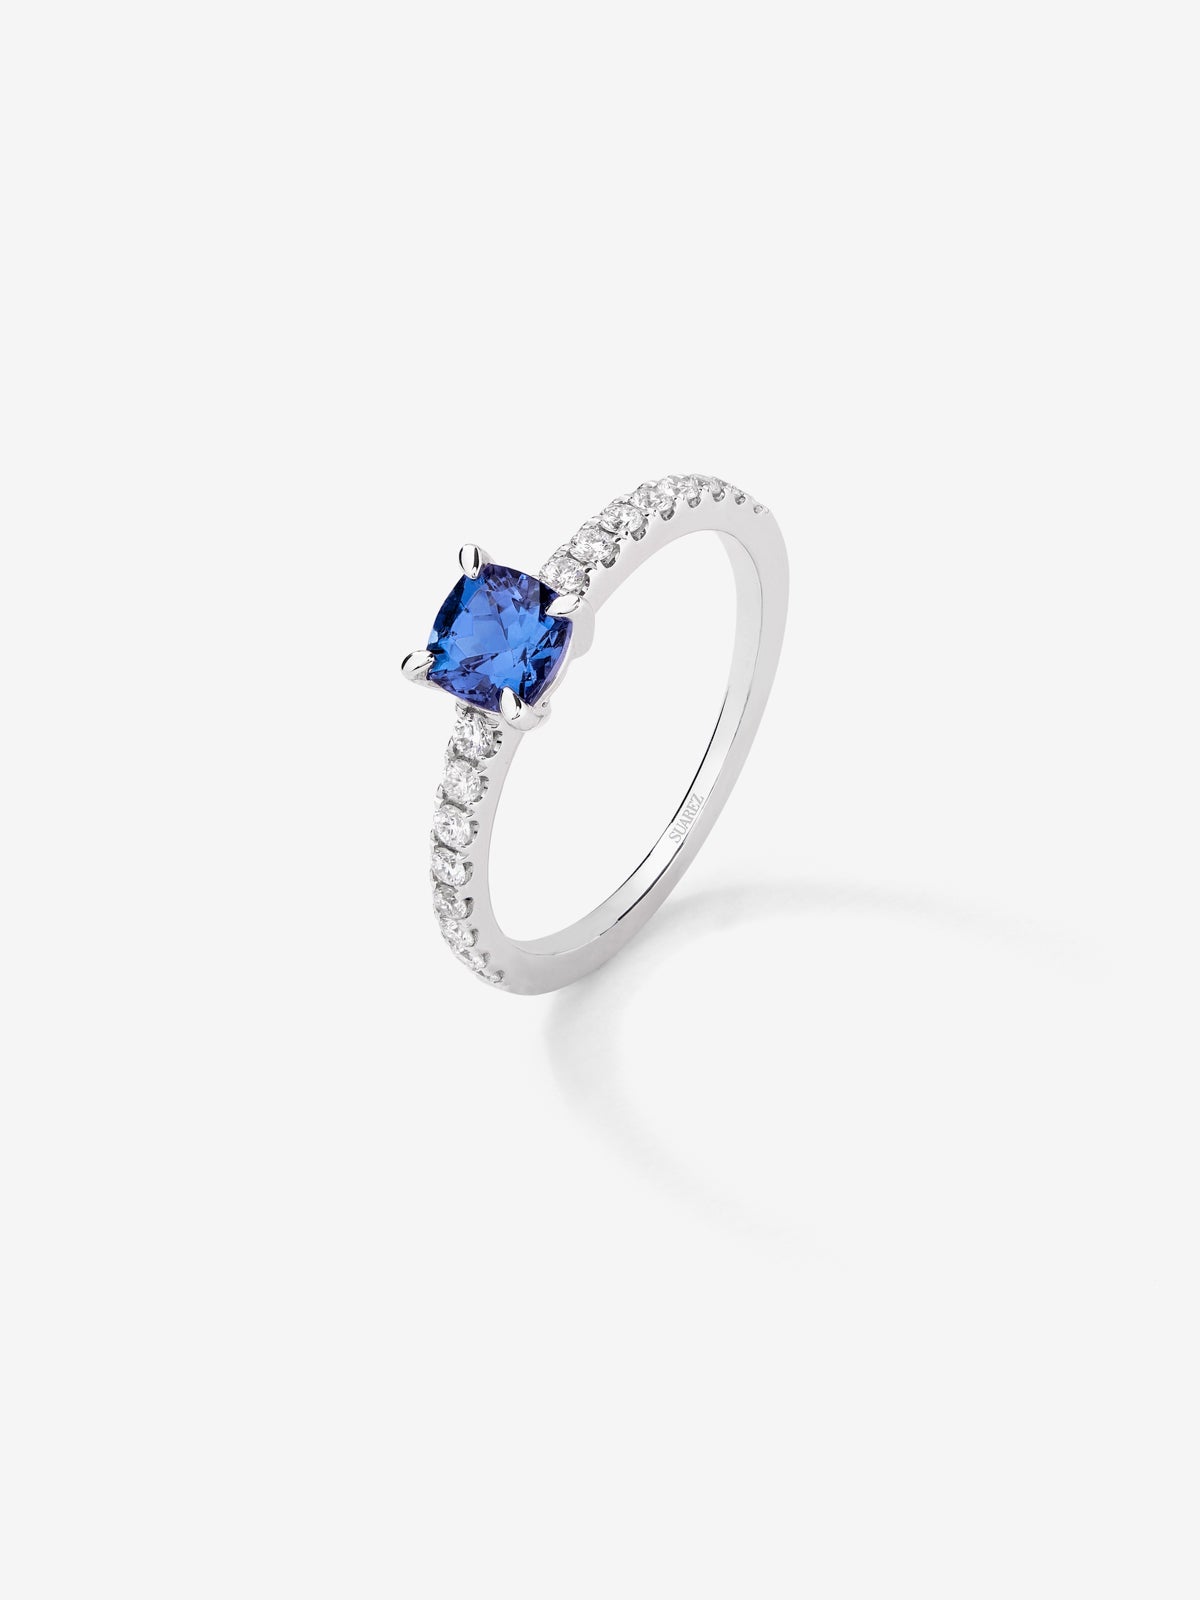 18K White Gold Solitaire Ring with Tanzanite and Diamond